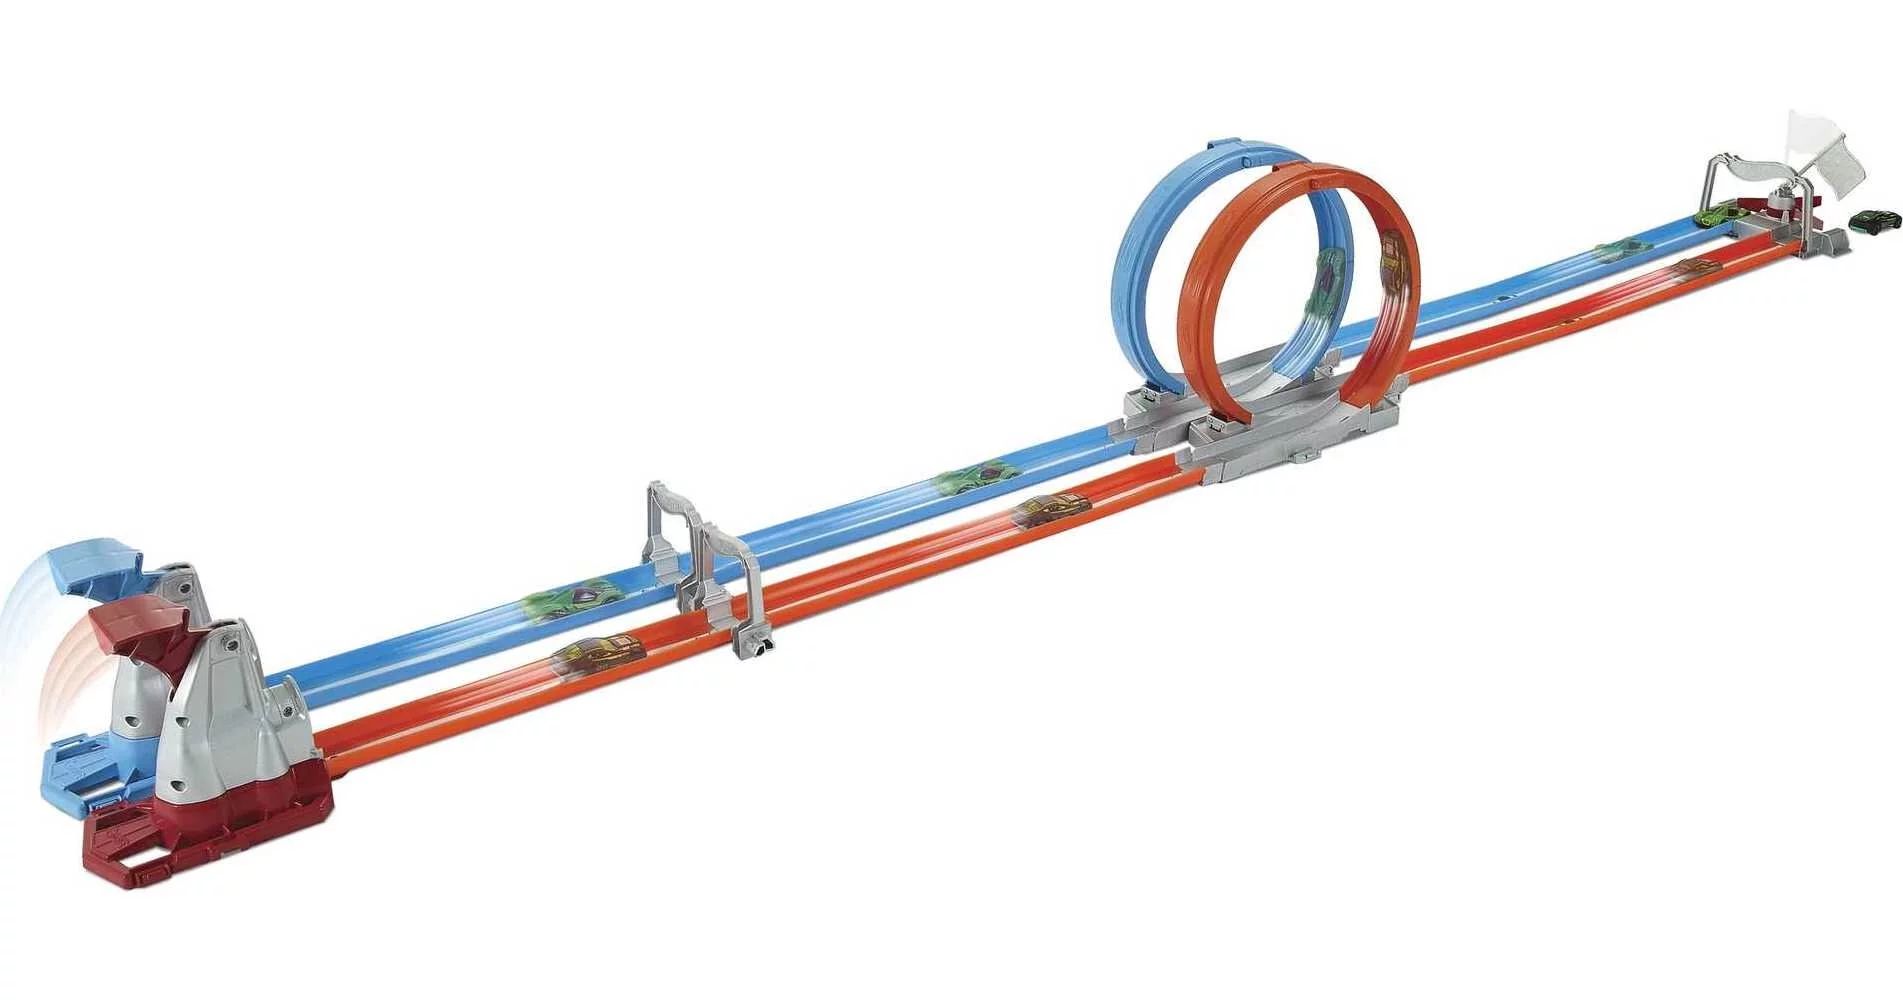 Hot Wheels Double Loop Dash Track Set with 2 Toy Cars in 1:64 Scale, 12-ft Long, for Children Age... | Walmart (US)